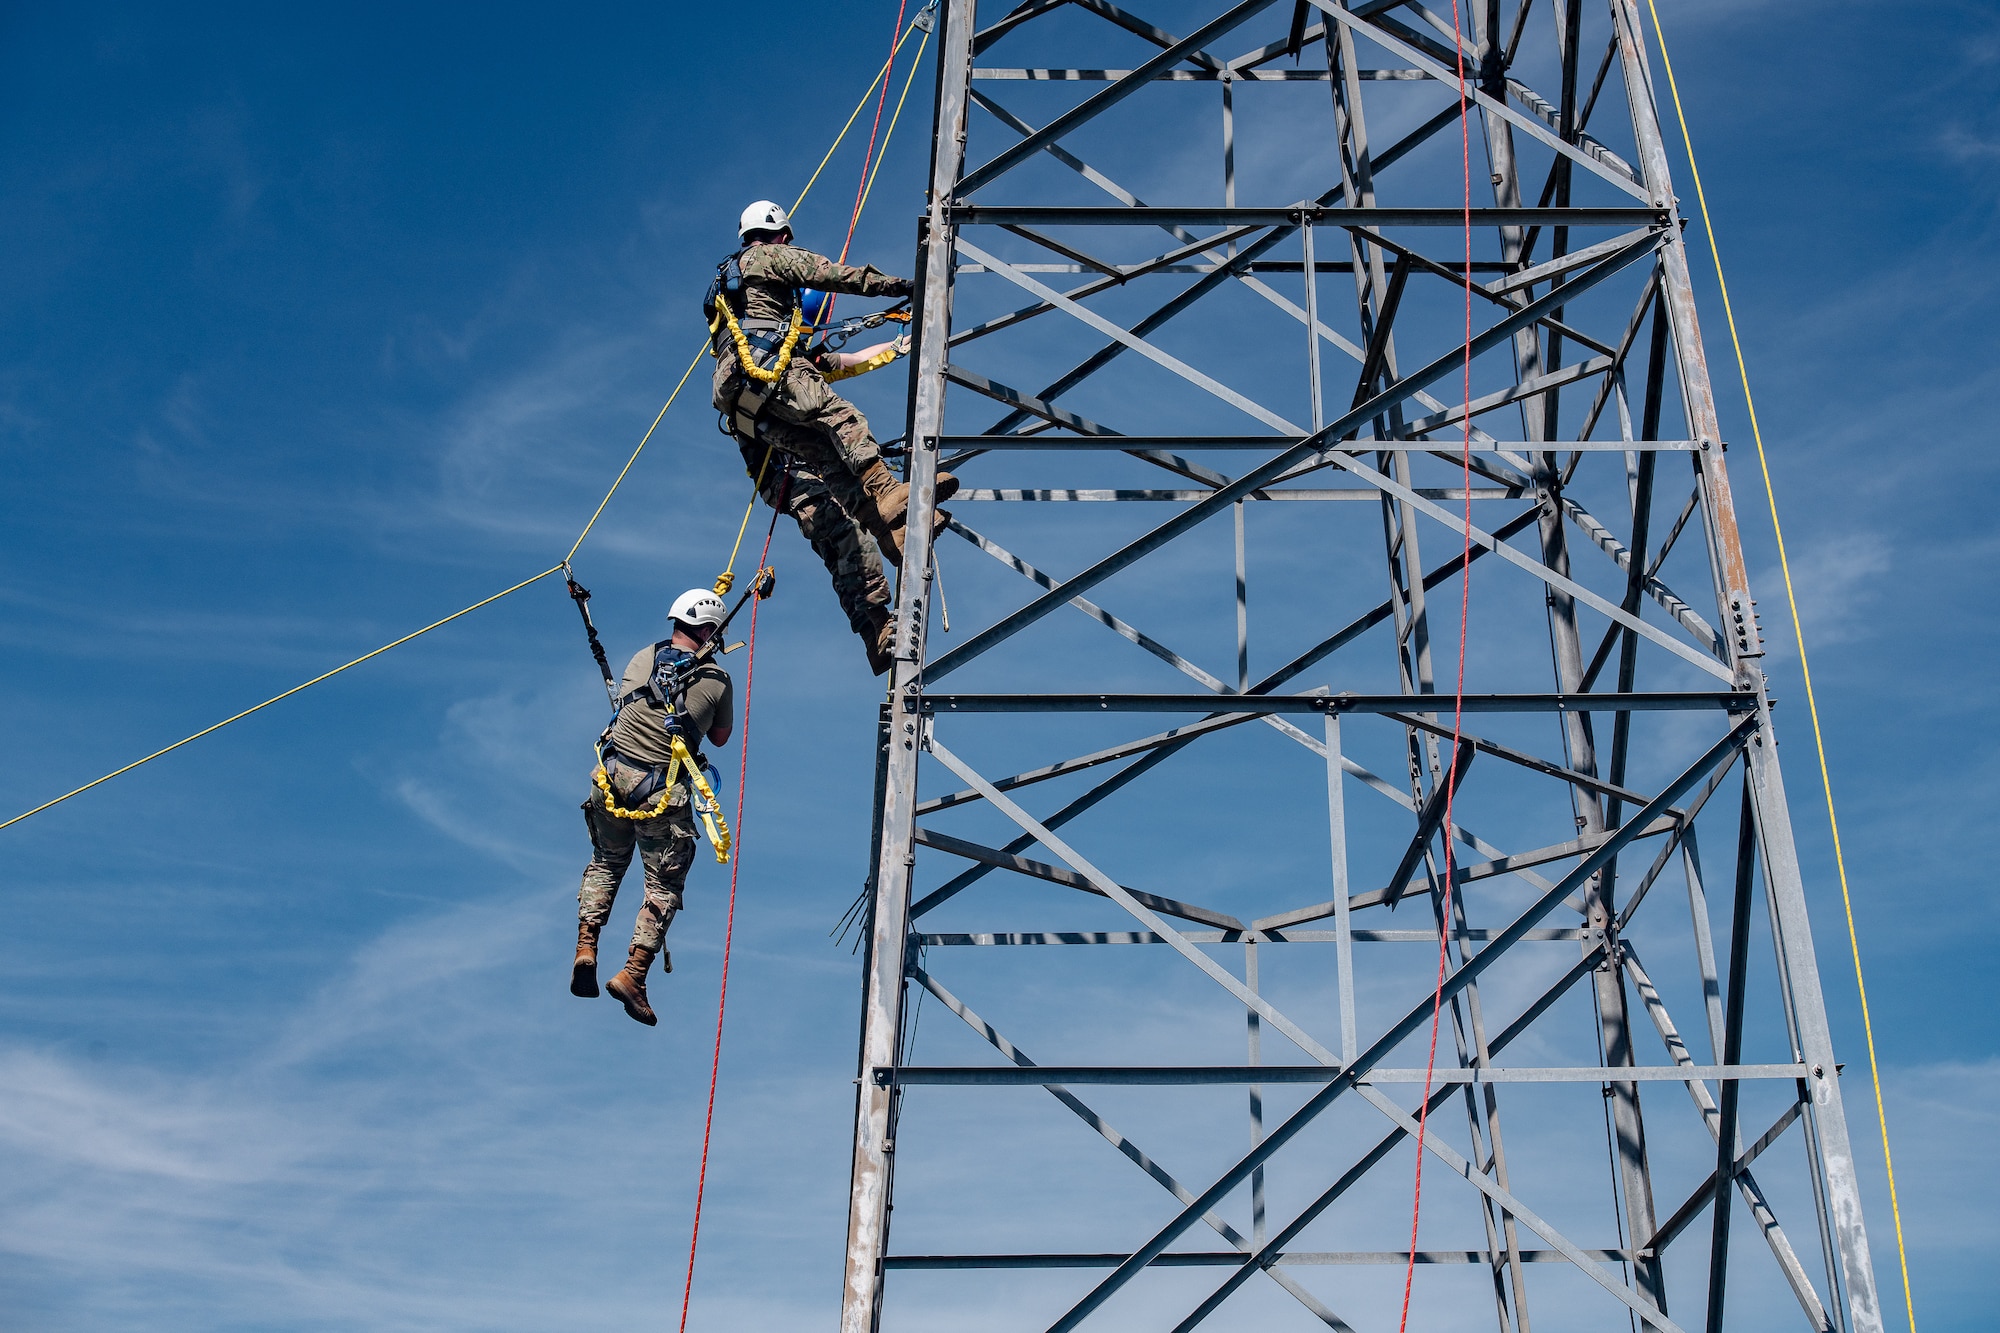 An Airman is lowered from a metal antenna tower during a rescue training scenario